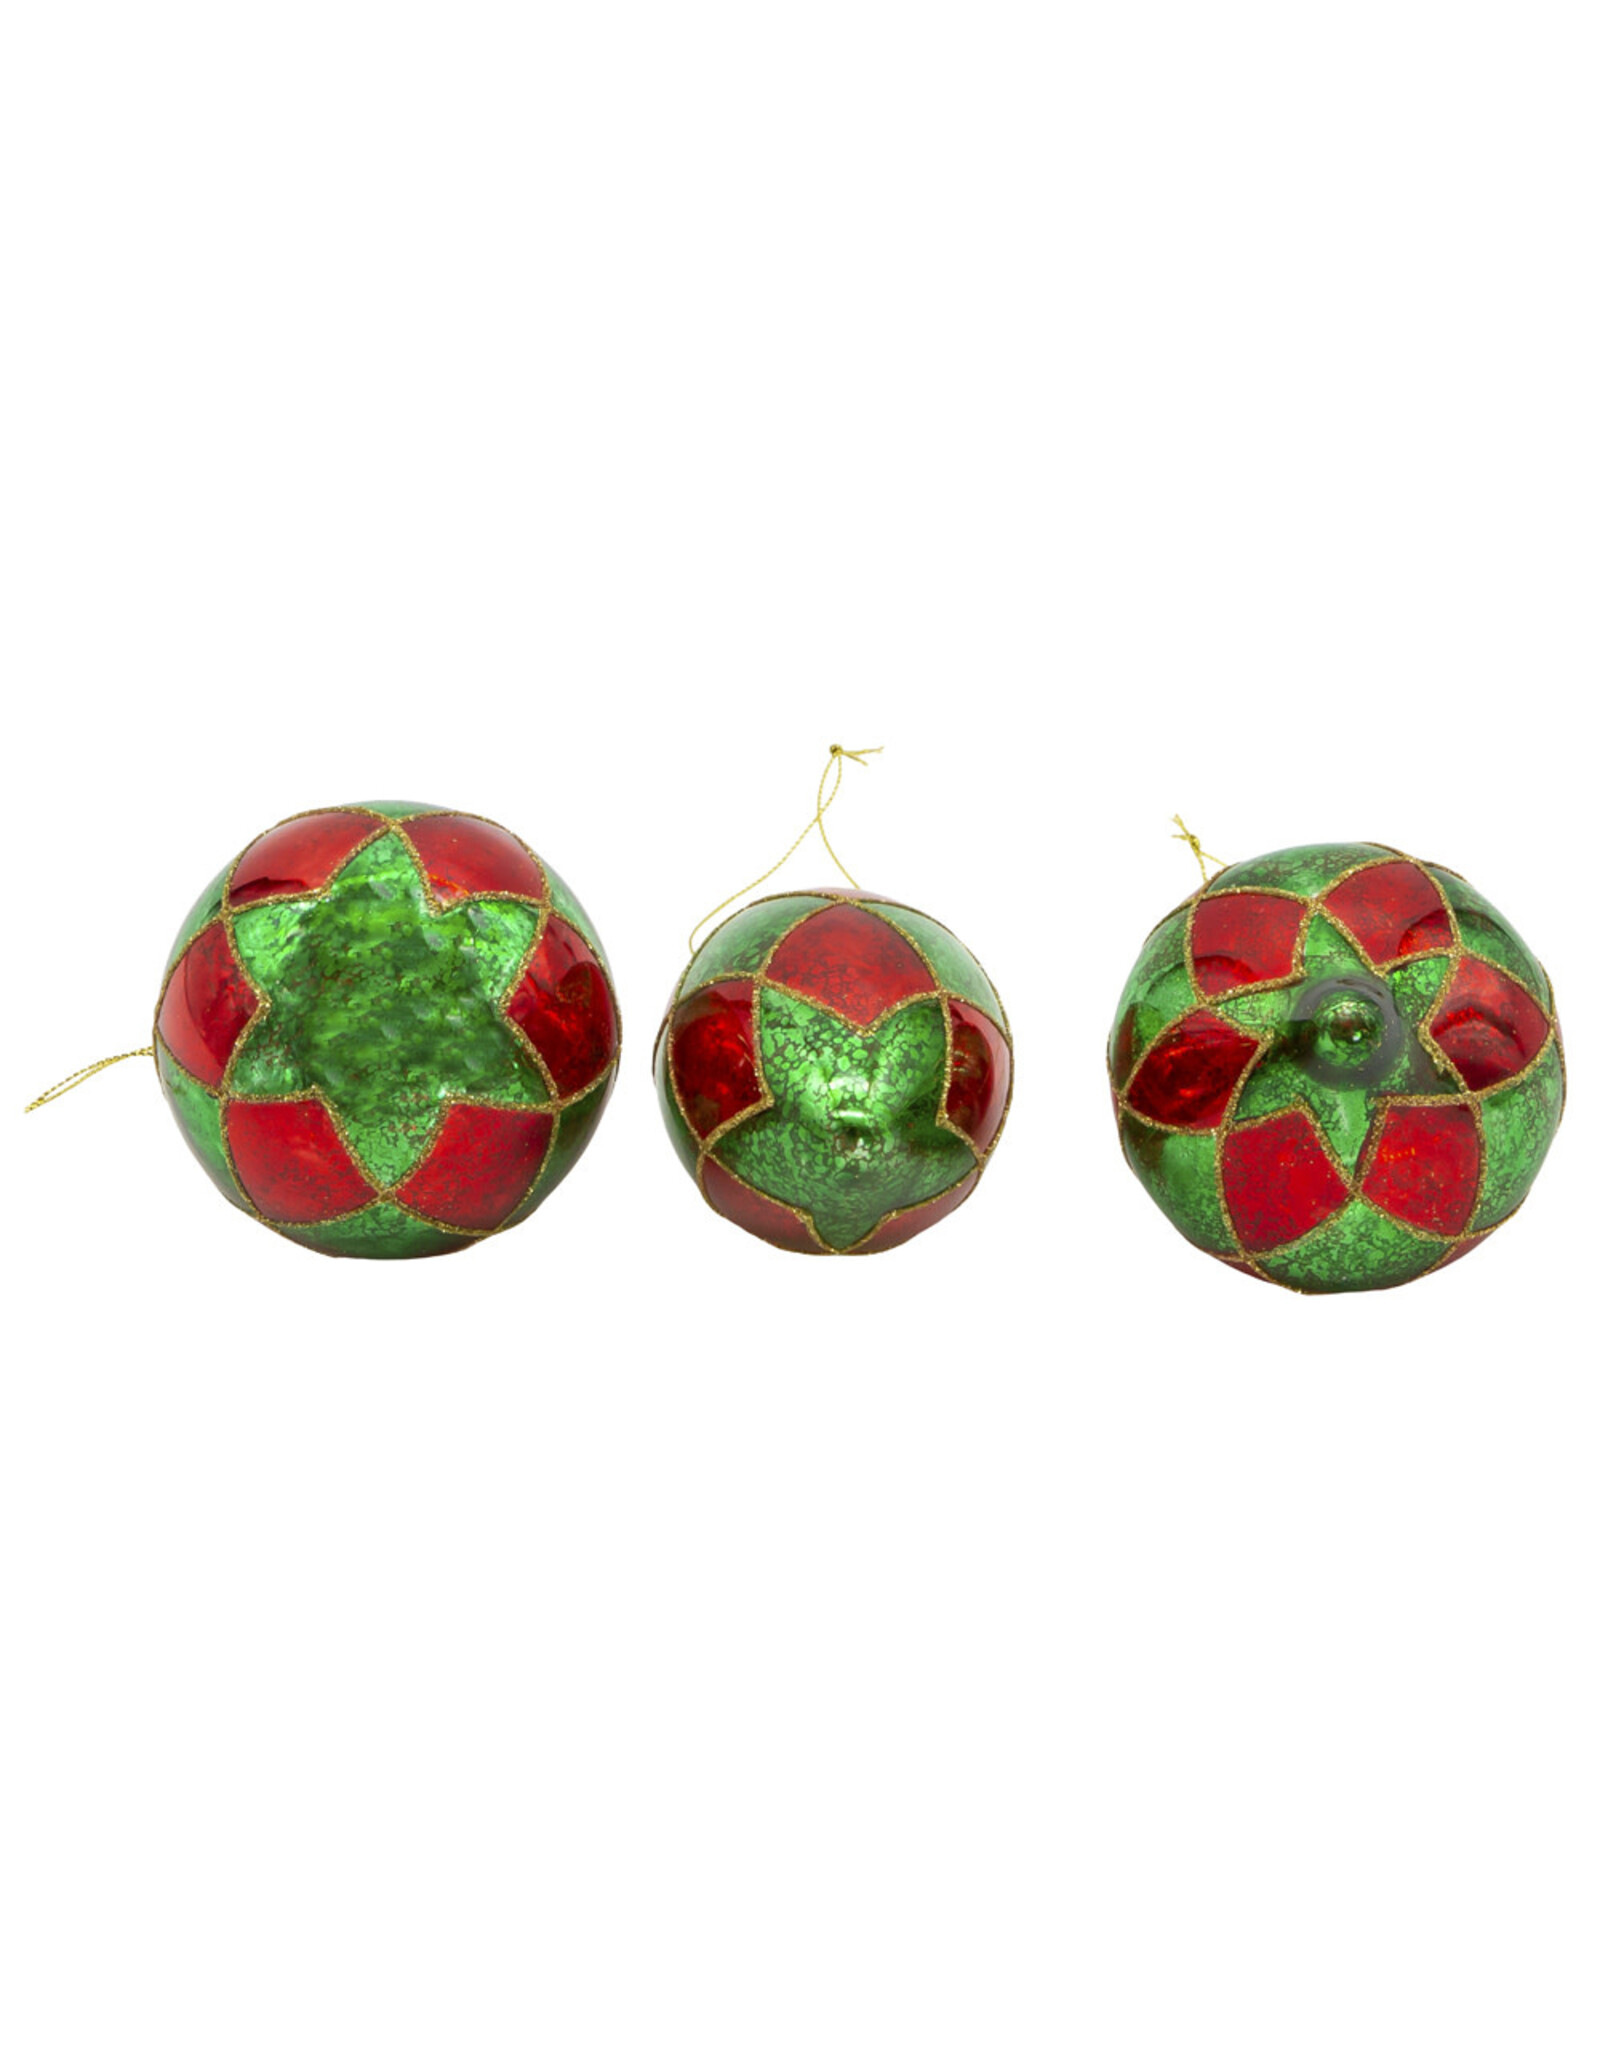 Kurt Adler Glass Green And Red Ornaments 80mm 3pc Set